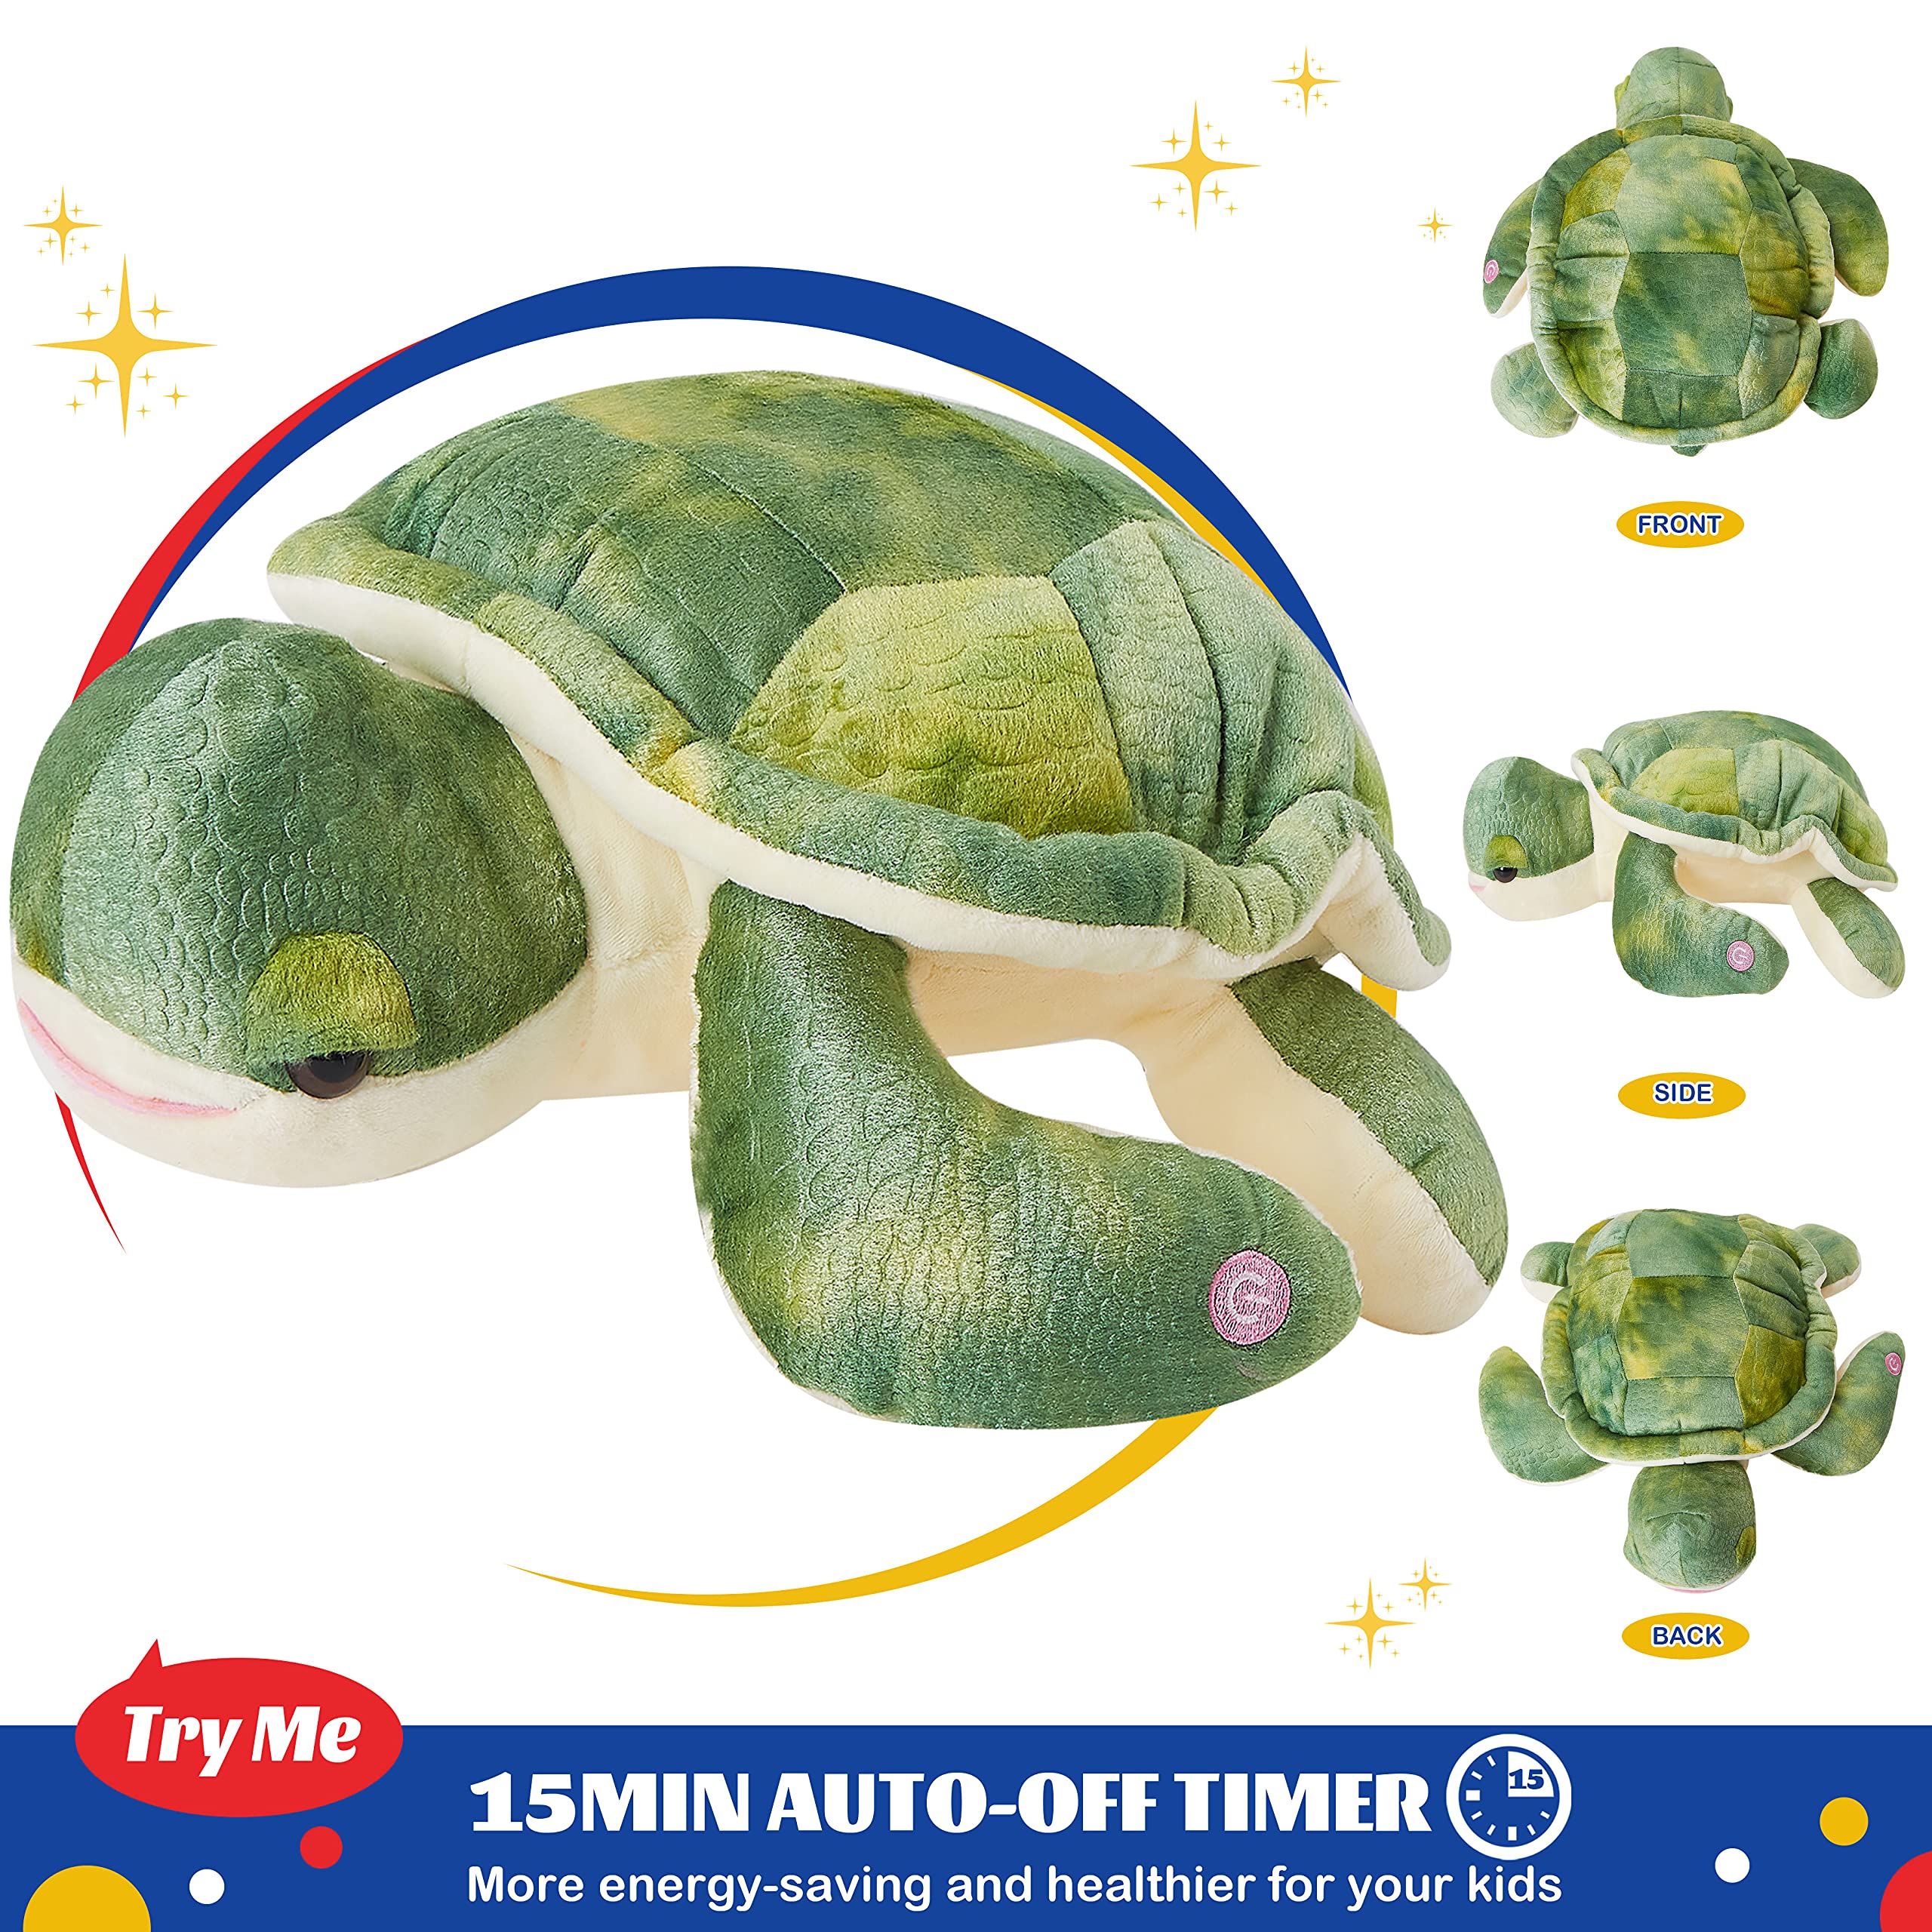 Glow Guards 14'' Light up Sea Turtle Stuffed Animal LED Soft Ocean Life Plush Toy Pillow with Colorful Night Lights Glowing Birthday Children's Day Gifts for Toddler Kids